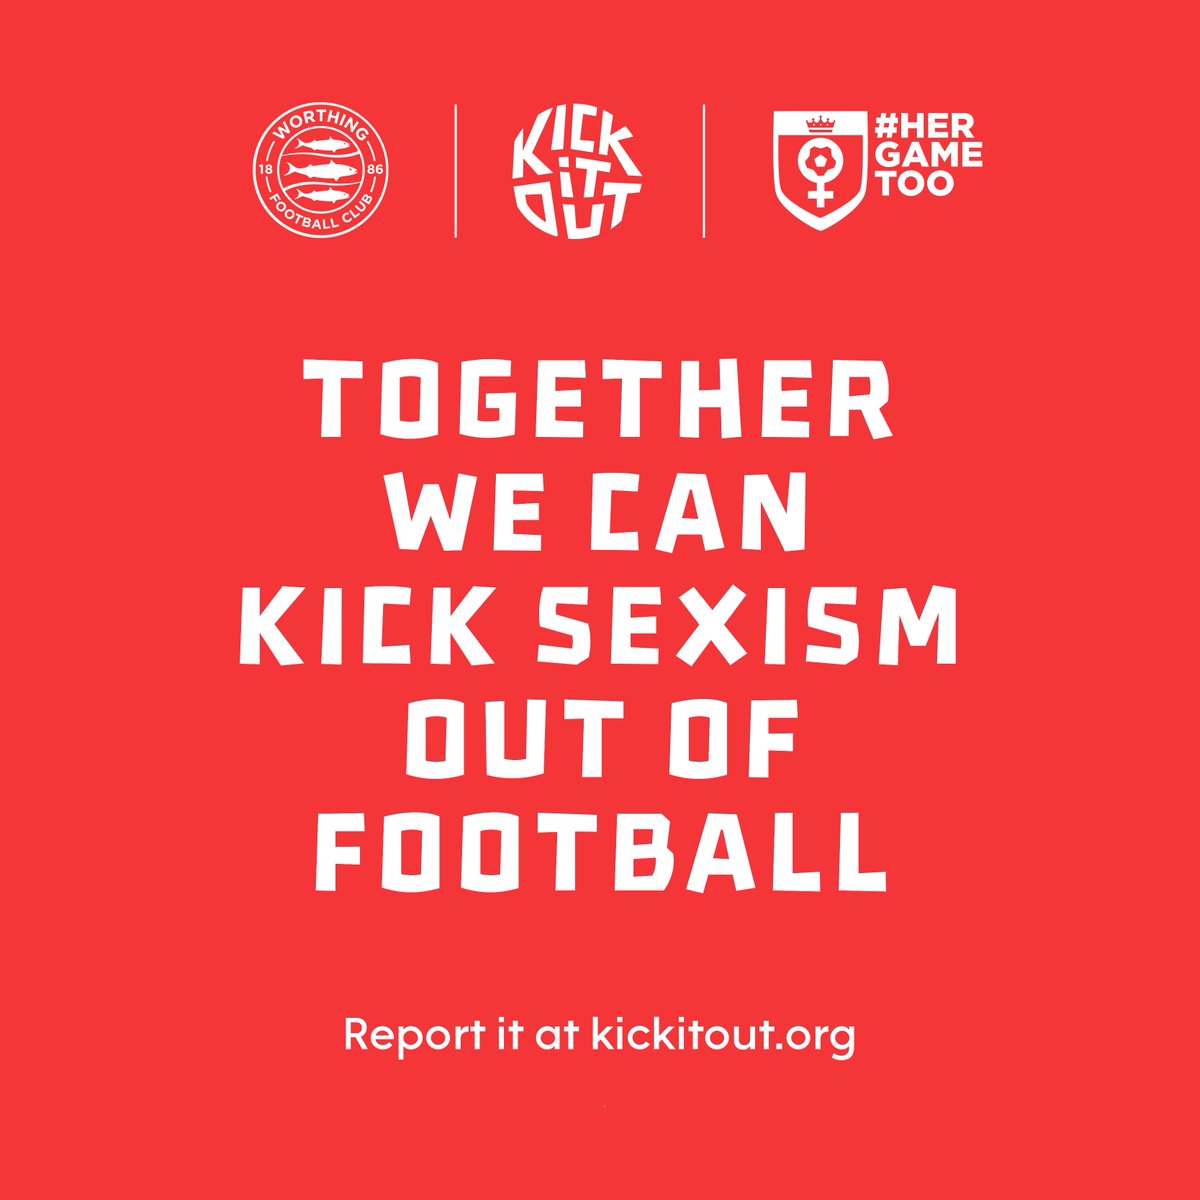 ❤️ Proudly supporting Kick It Out and Her Game Too this #InternationalWomensDay There is no place for sexism in football. Football is a game for everyone. @kickitout | @HerGameToo